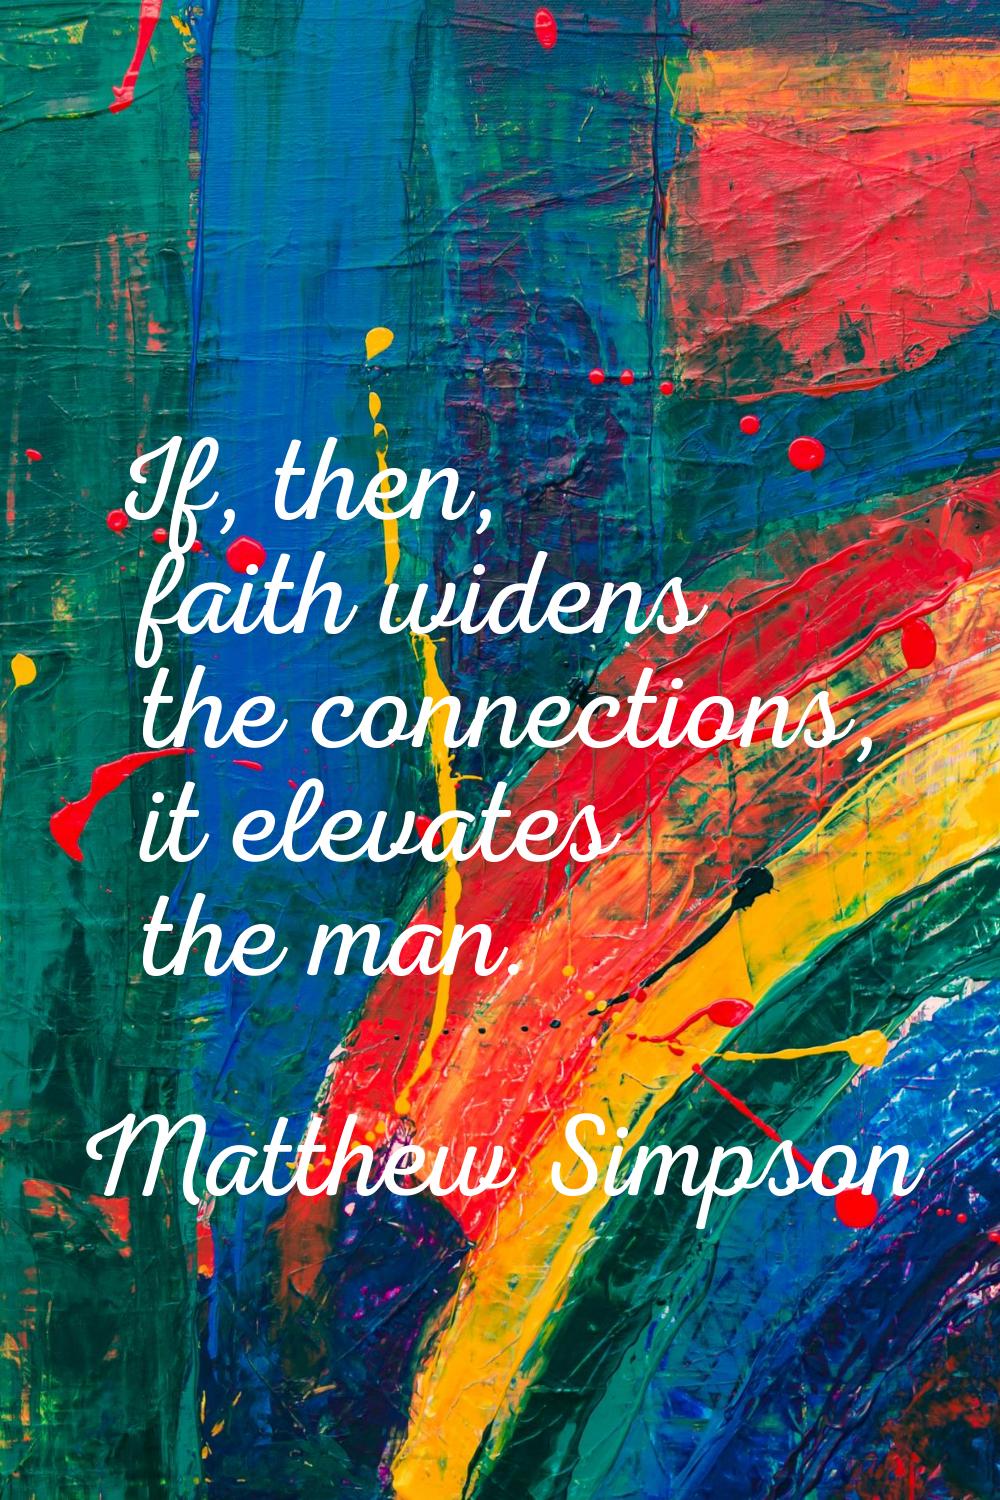 If, then, faith widens the connections, it elevates the man.